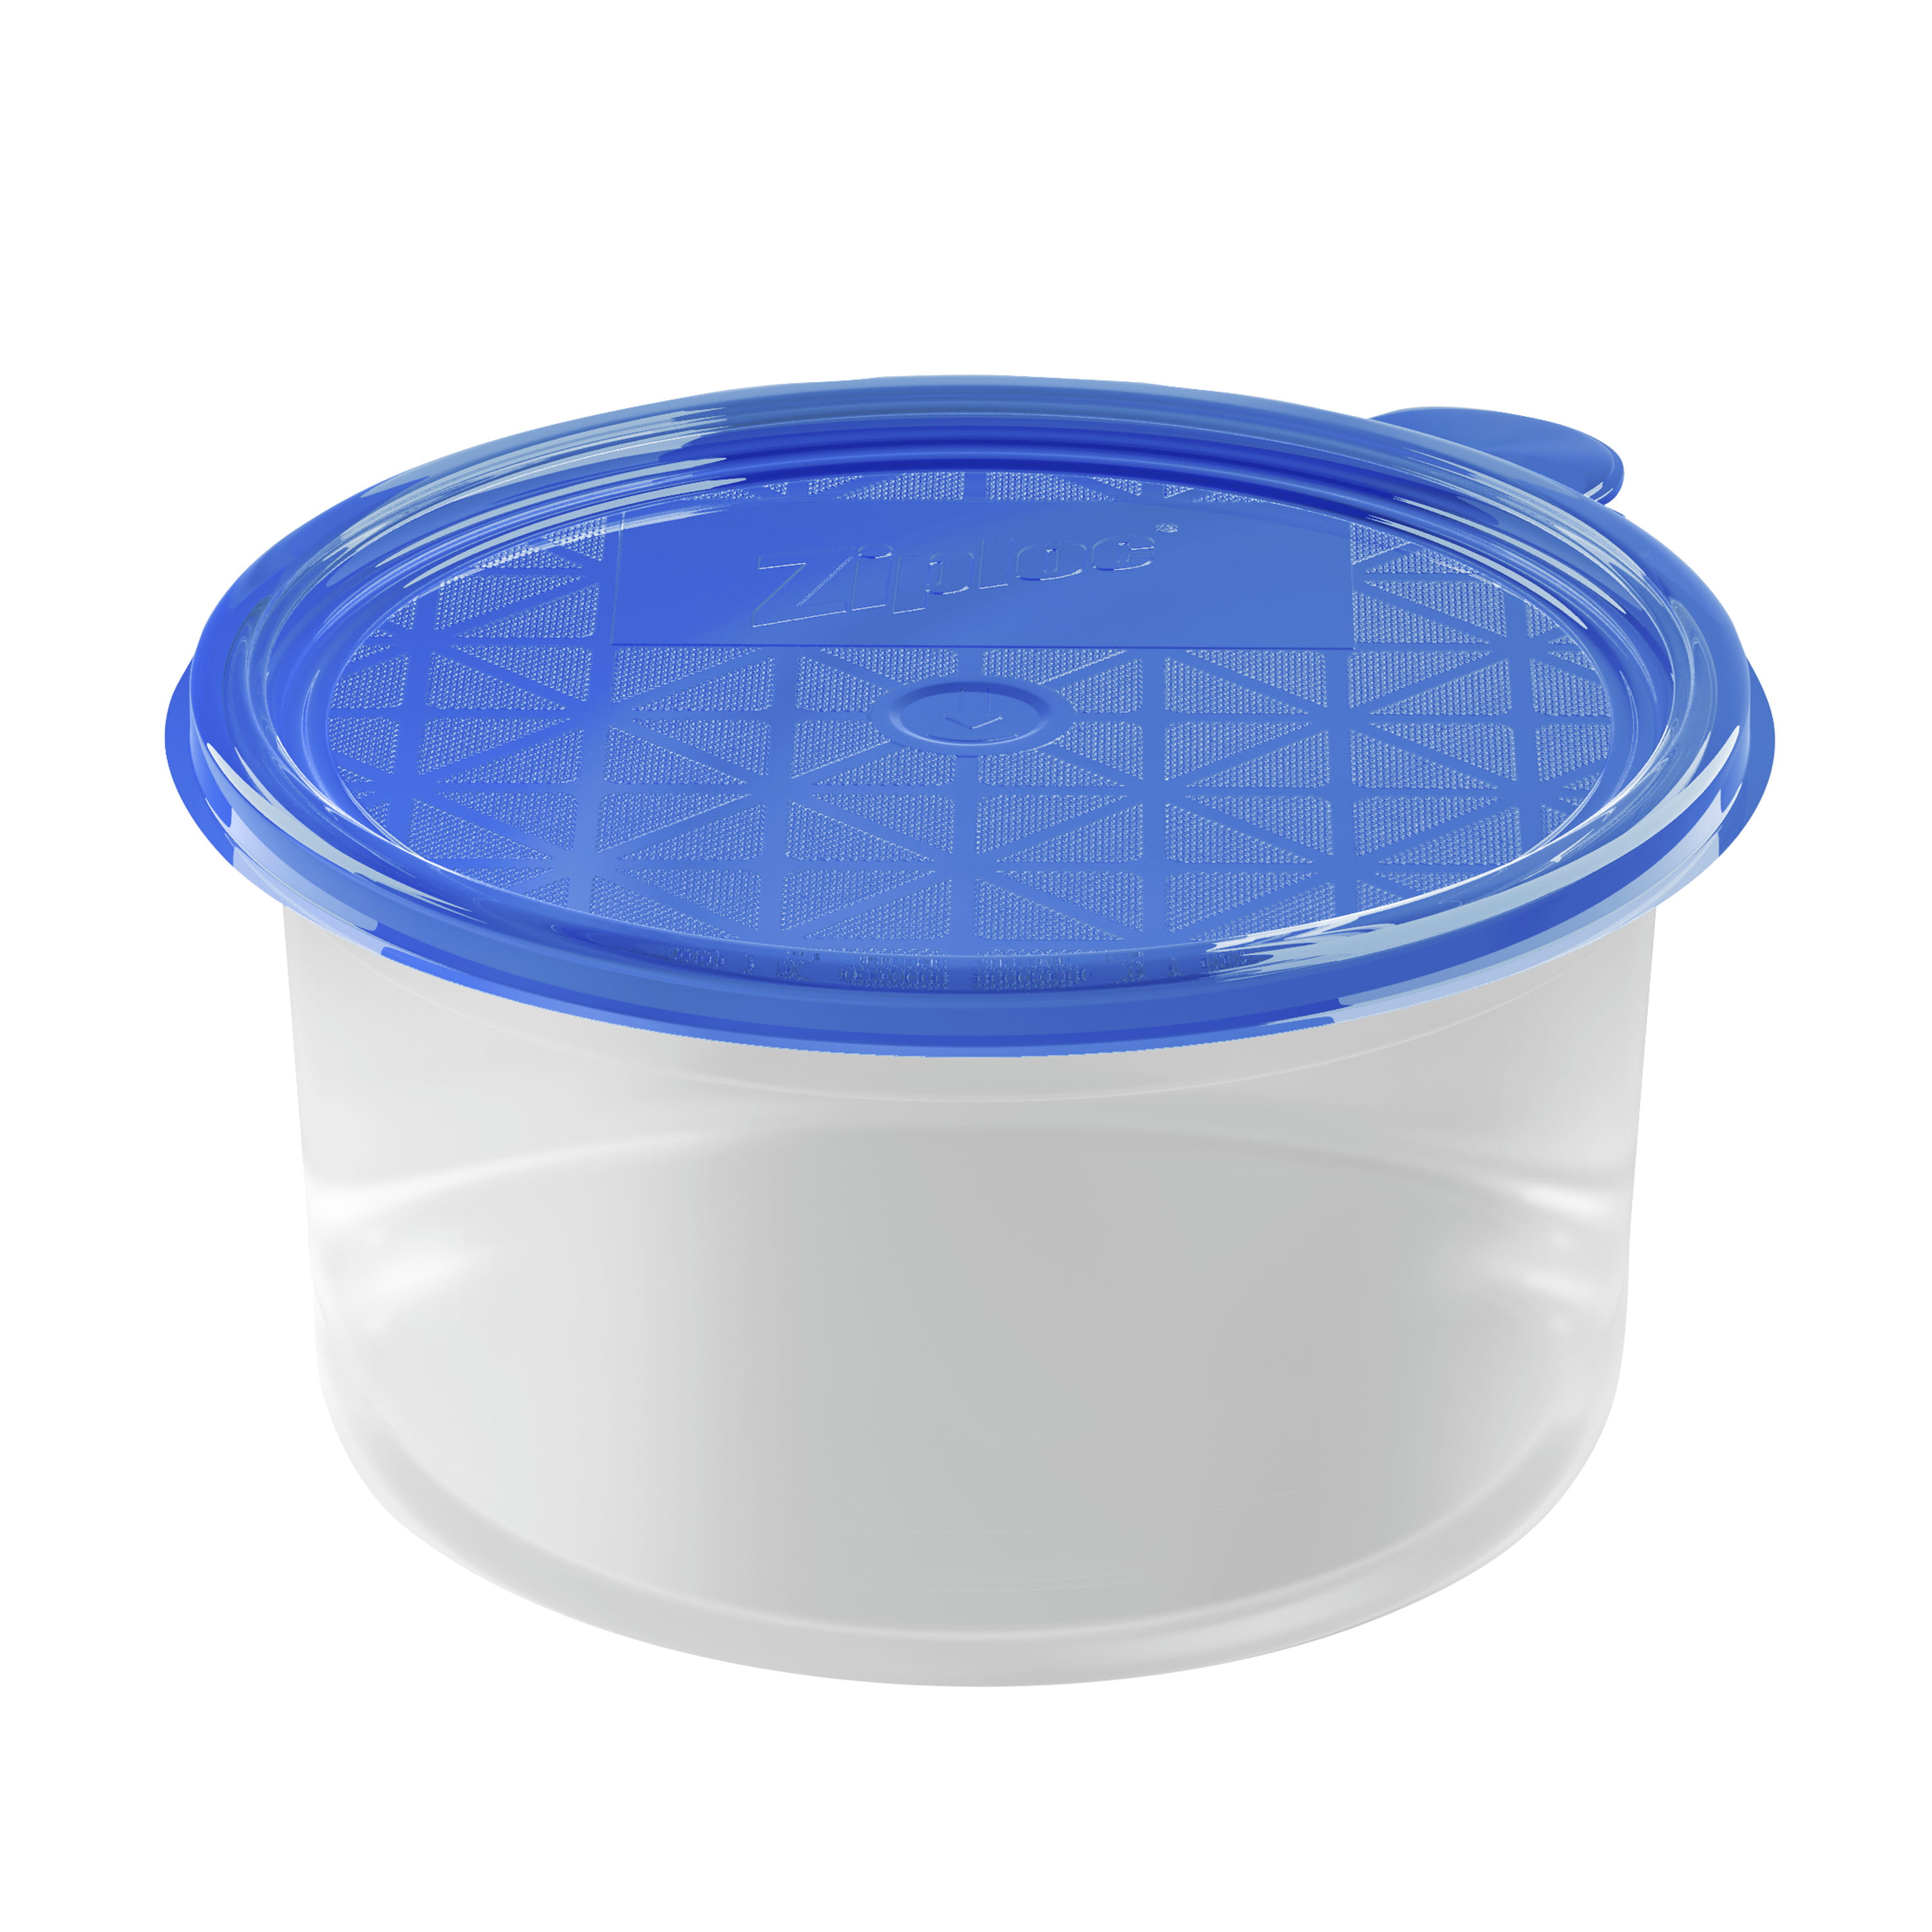 Ziploc Large Bowl Snap 'N Seal Lid 48 Ounce Containers, 2 Count 